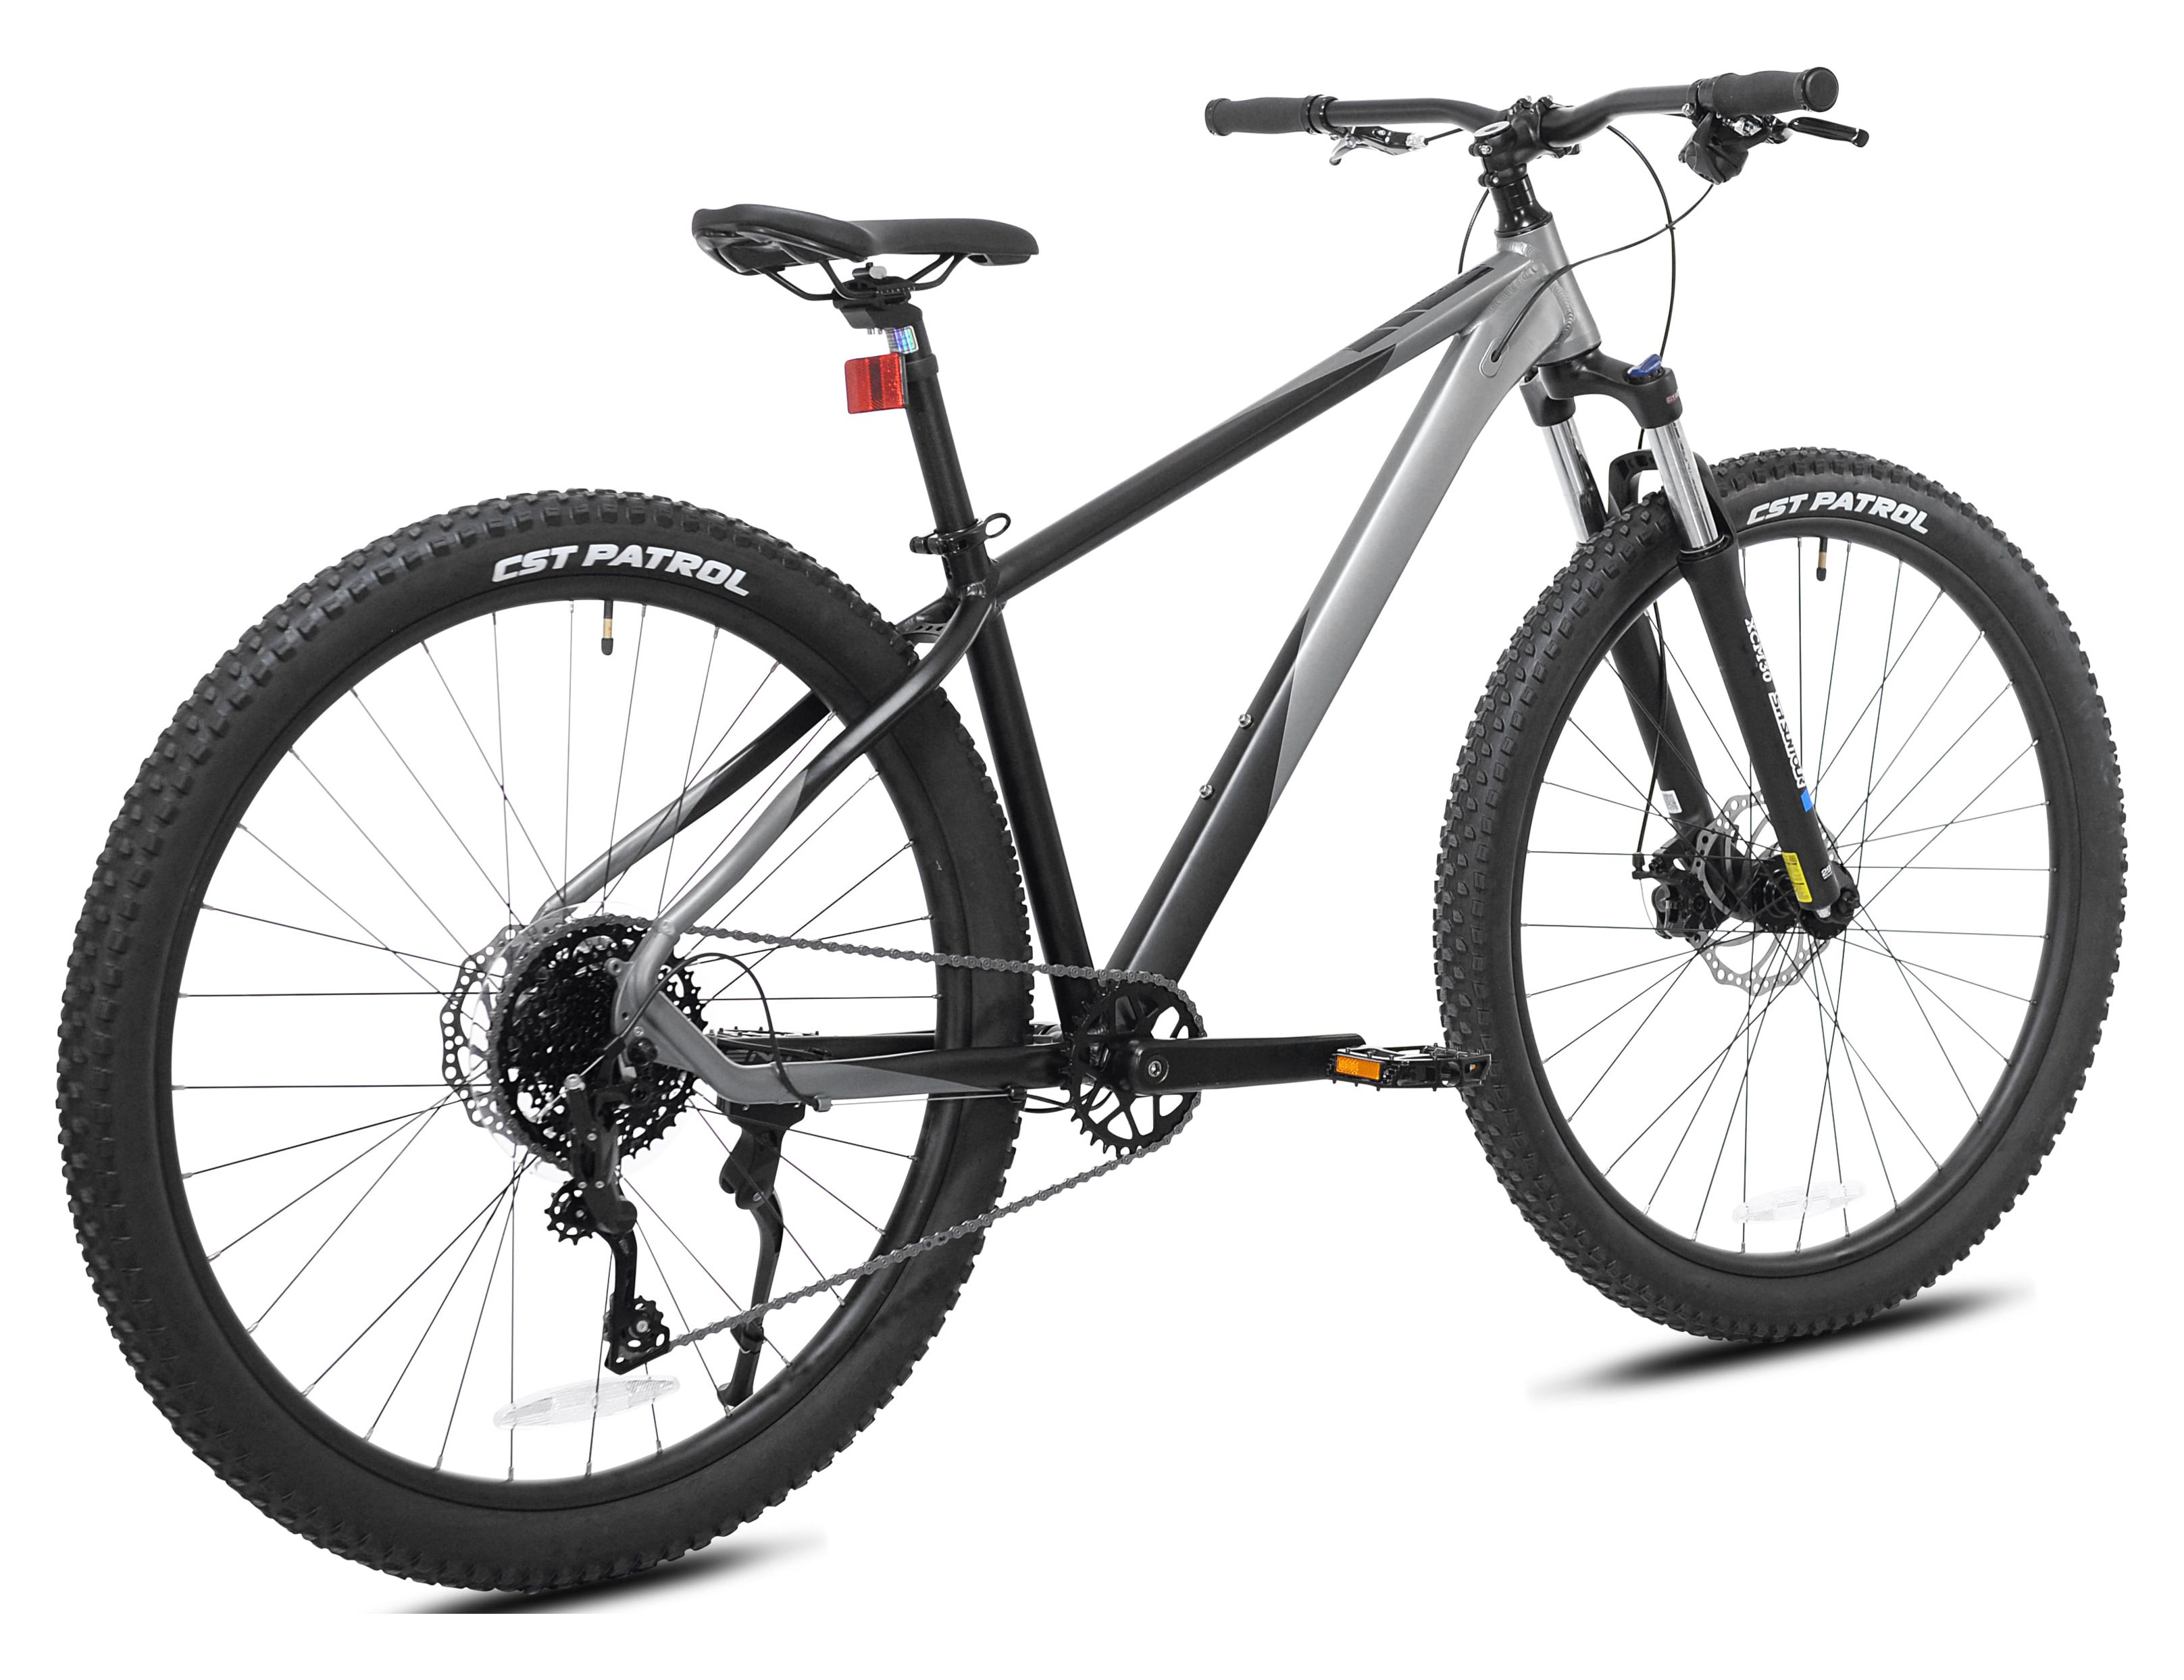 Kent Bicycles 29" Men's Trouvaille Mountain Bike Medium, Black and Taupe - image 3 of 11